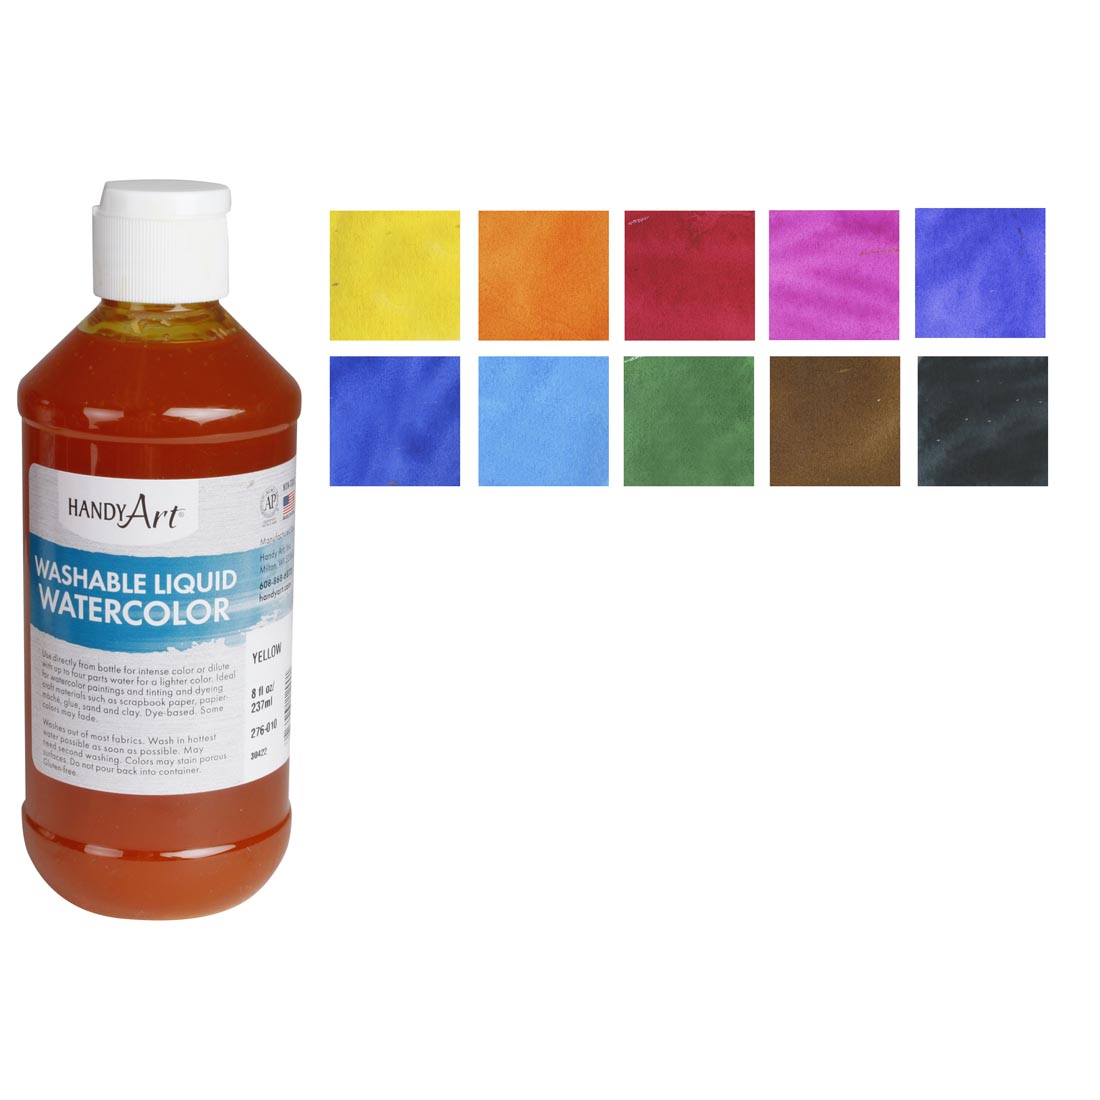 A bottle from the Handy Art Washable Liquid Watercolors 10-Color Set along with the 10 color swatches